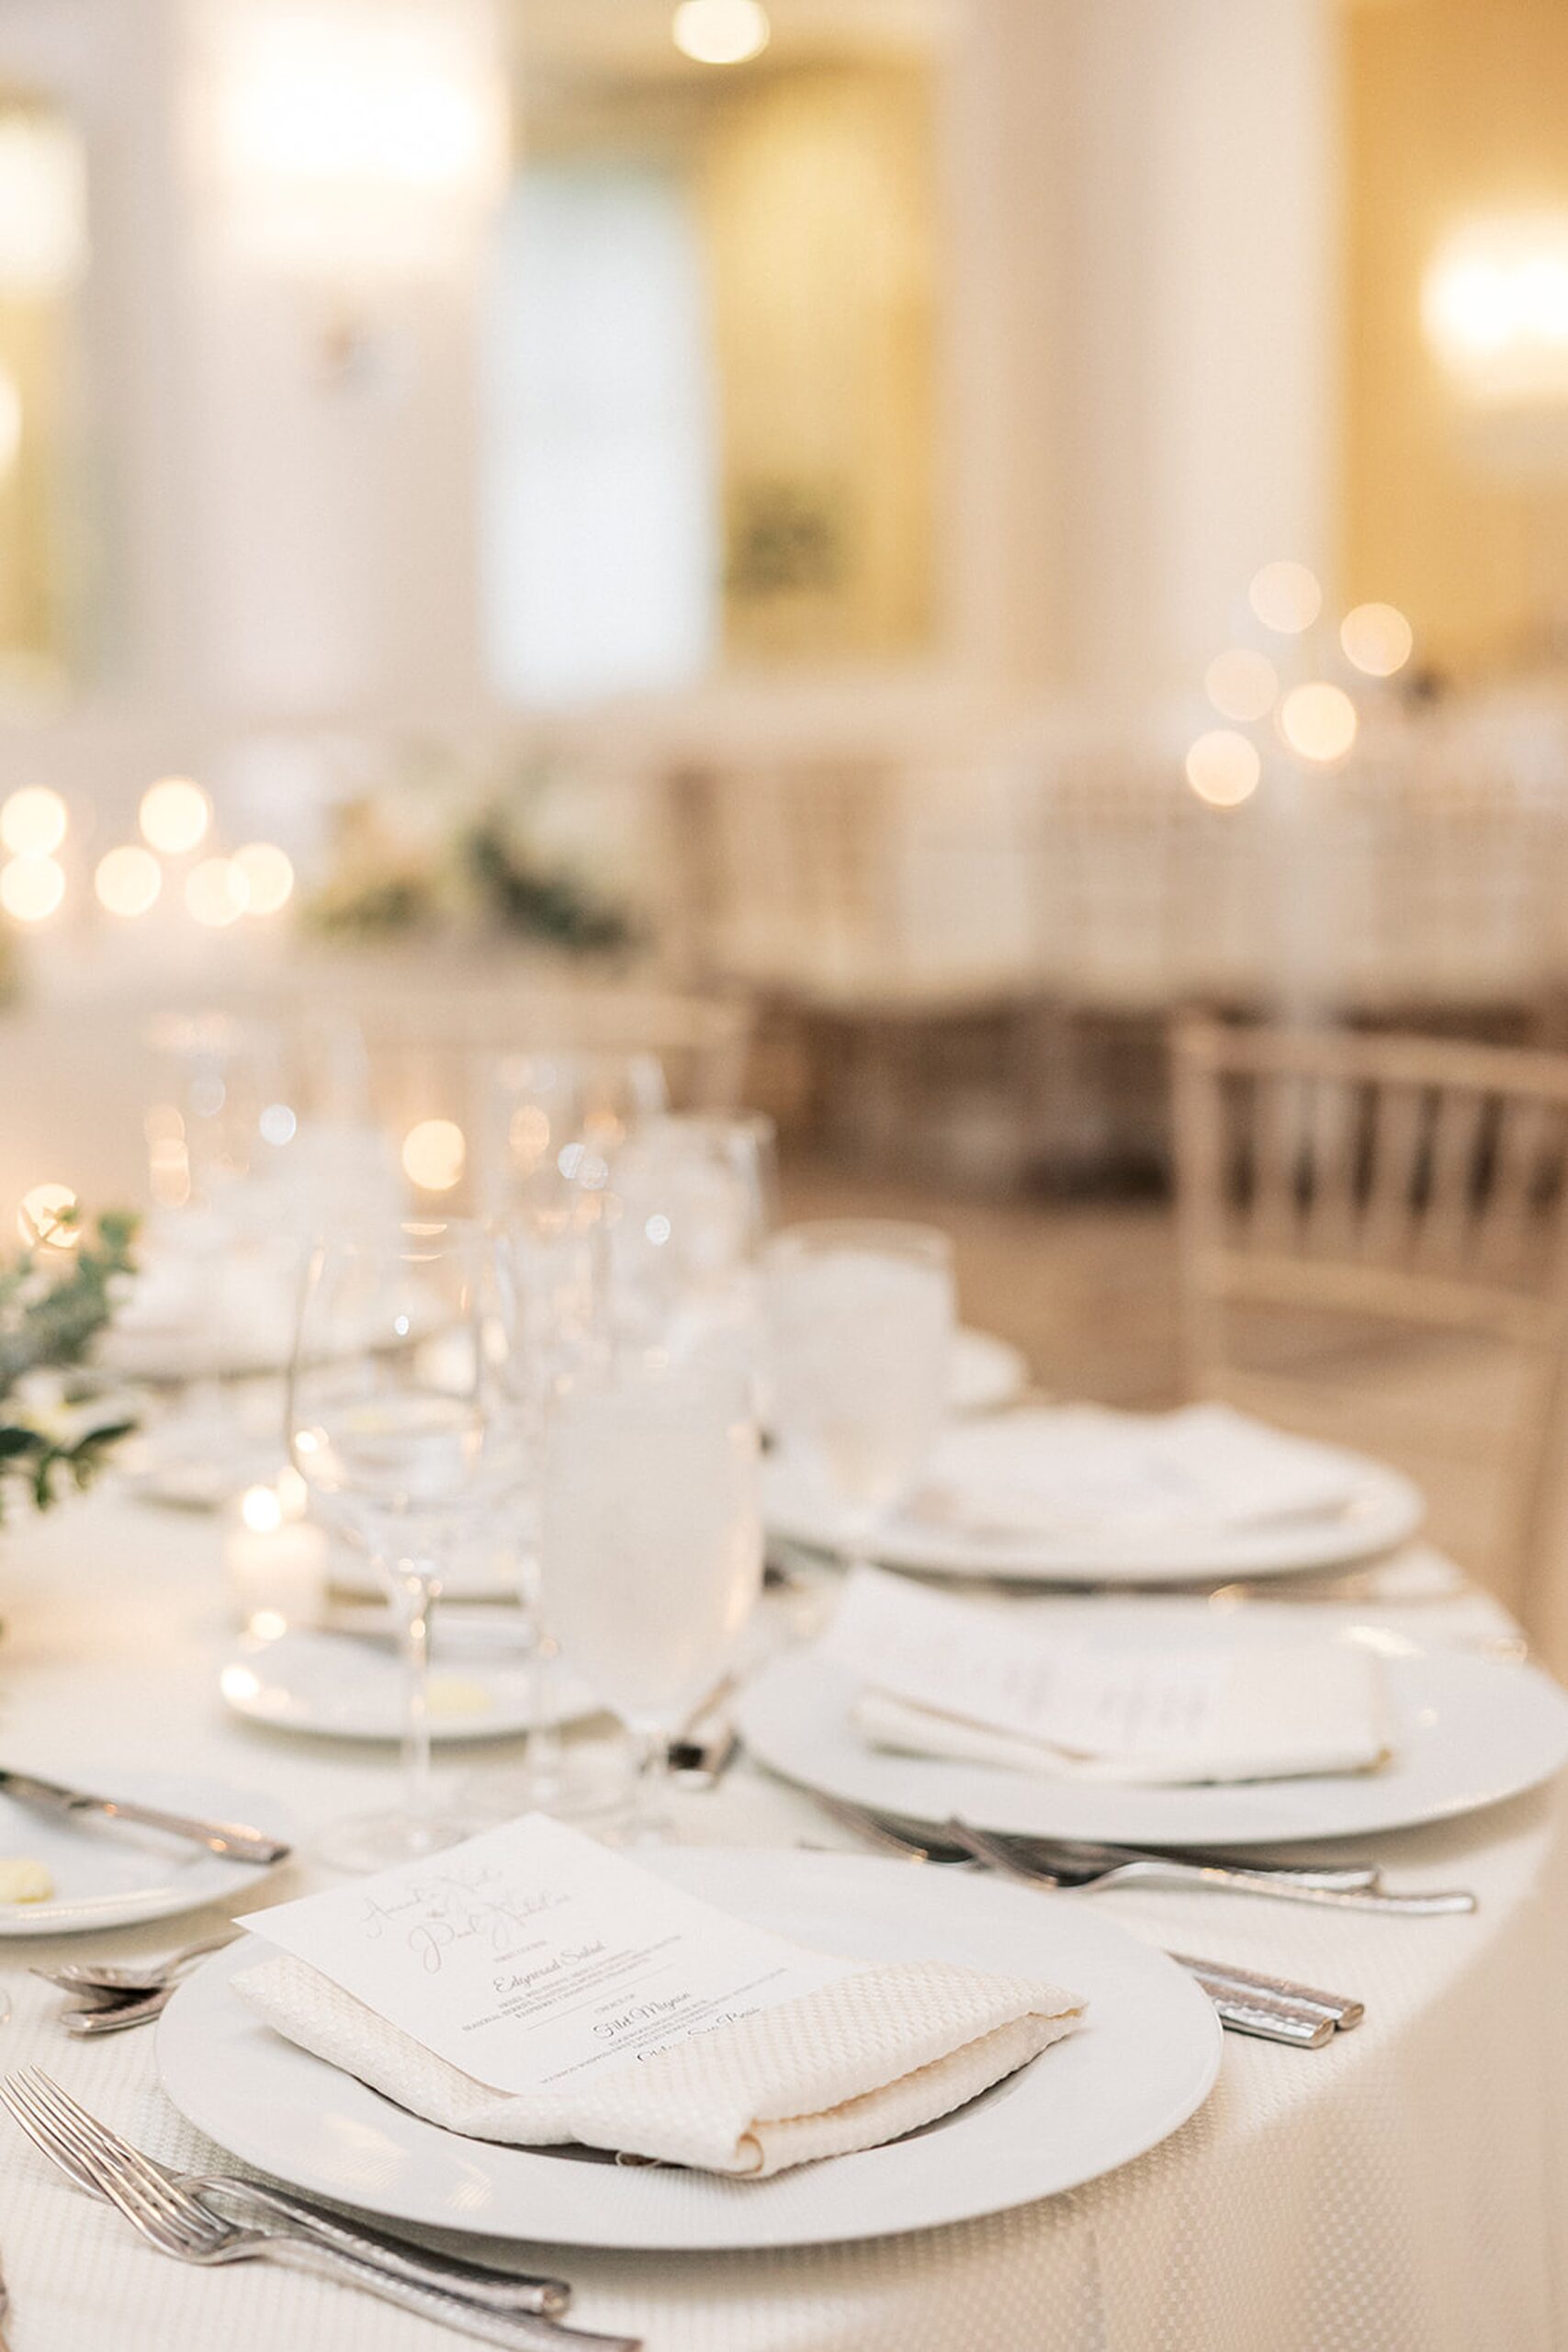 Details of a table setting with white linen at a edgewood country club wedding